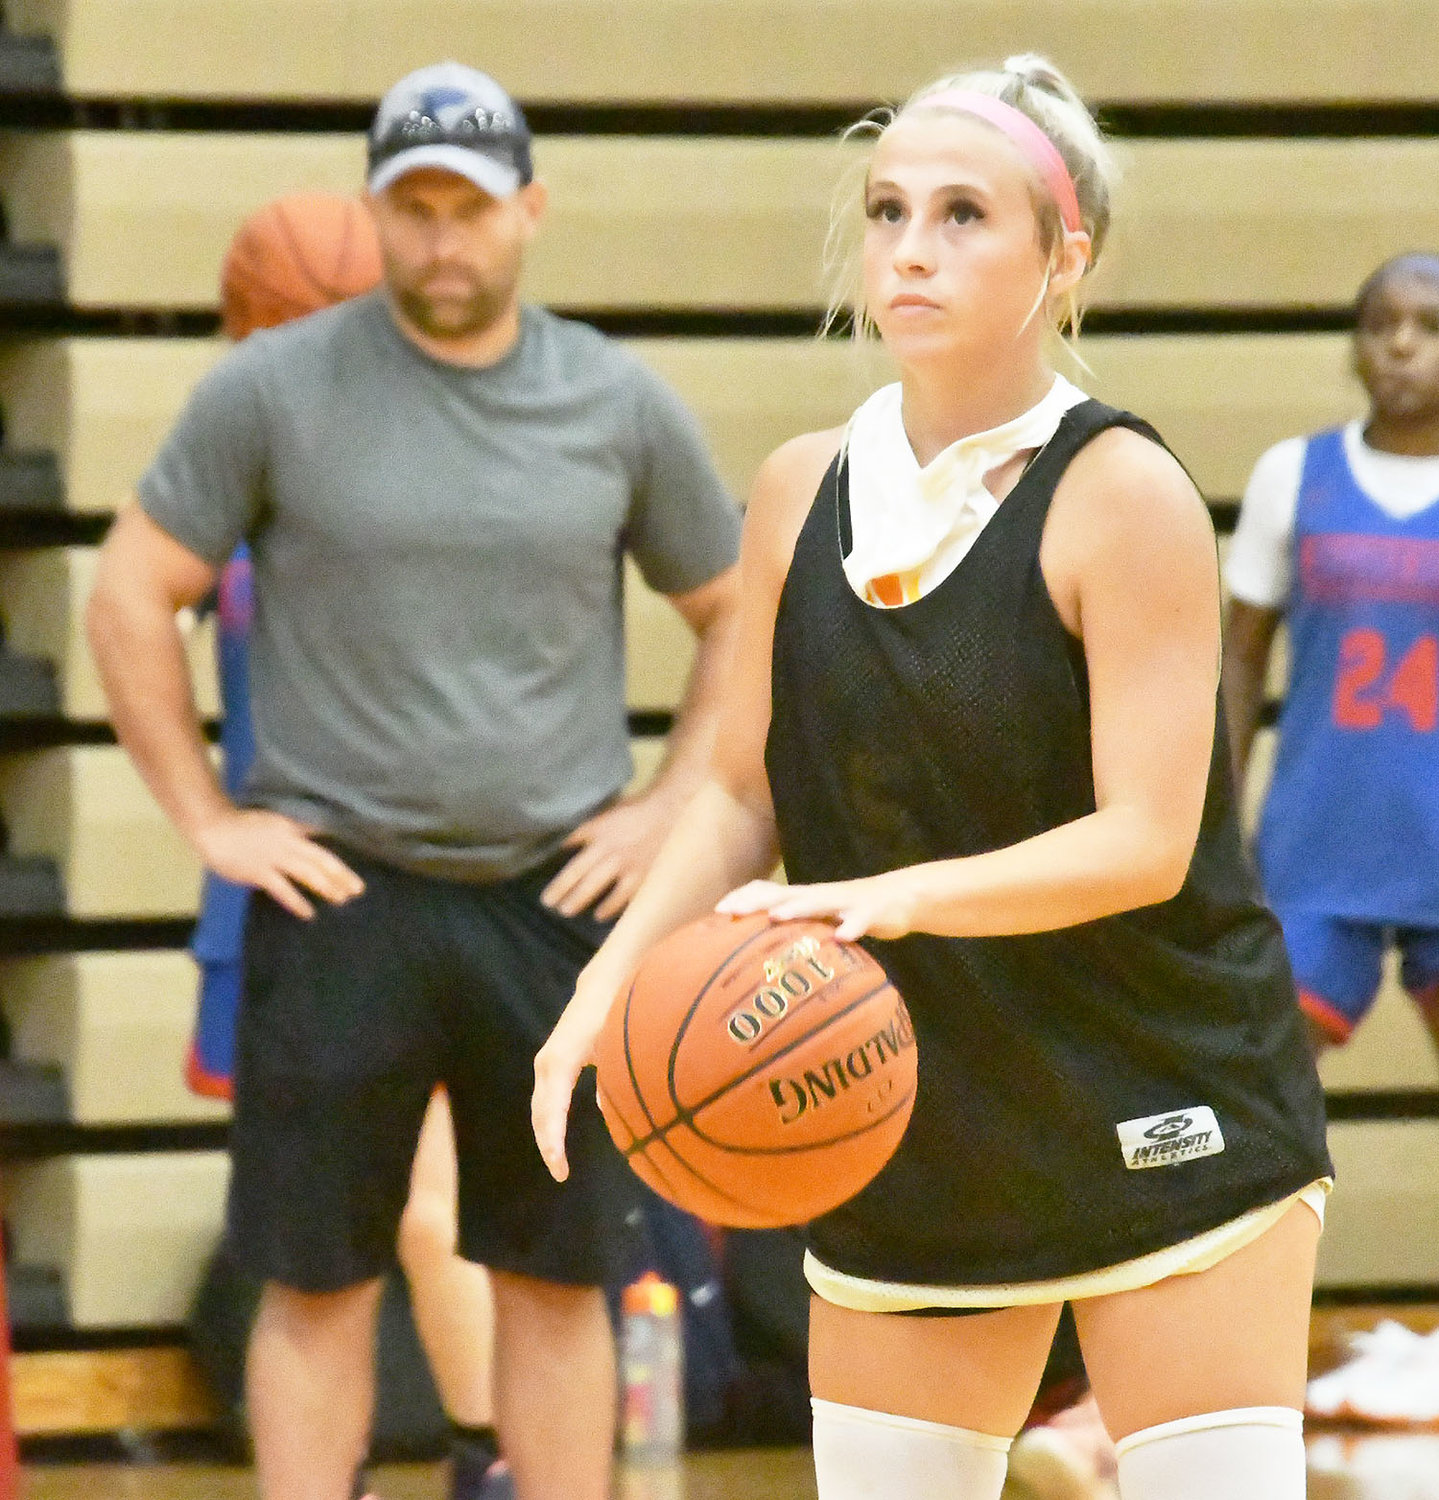 Cairo's Gracie Brumley dribbles and watches the scoreboard clock at the same time late during Tuesday's scrimmage versus Hermann.